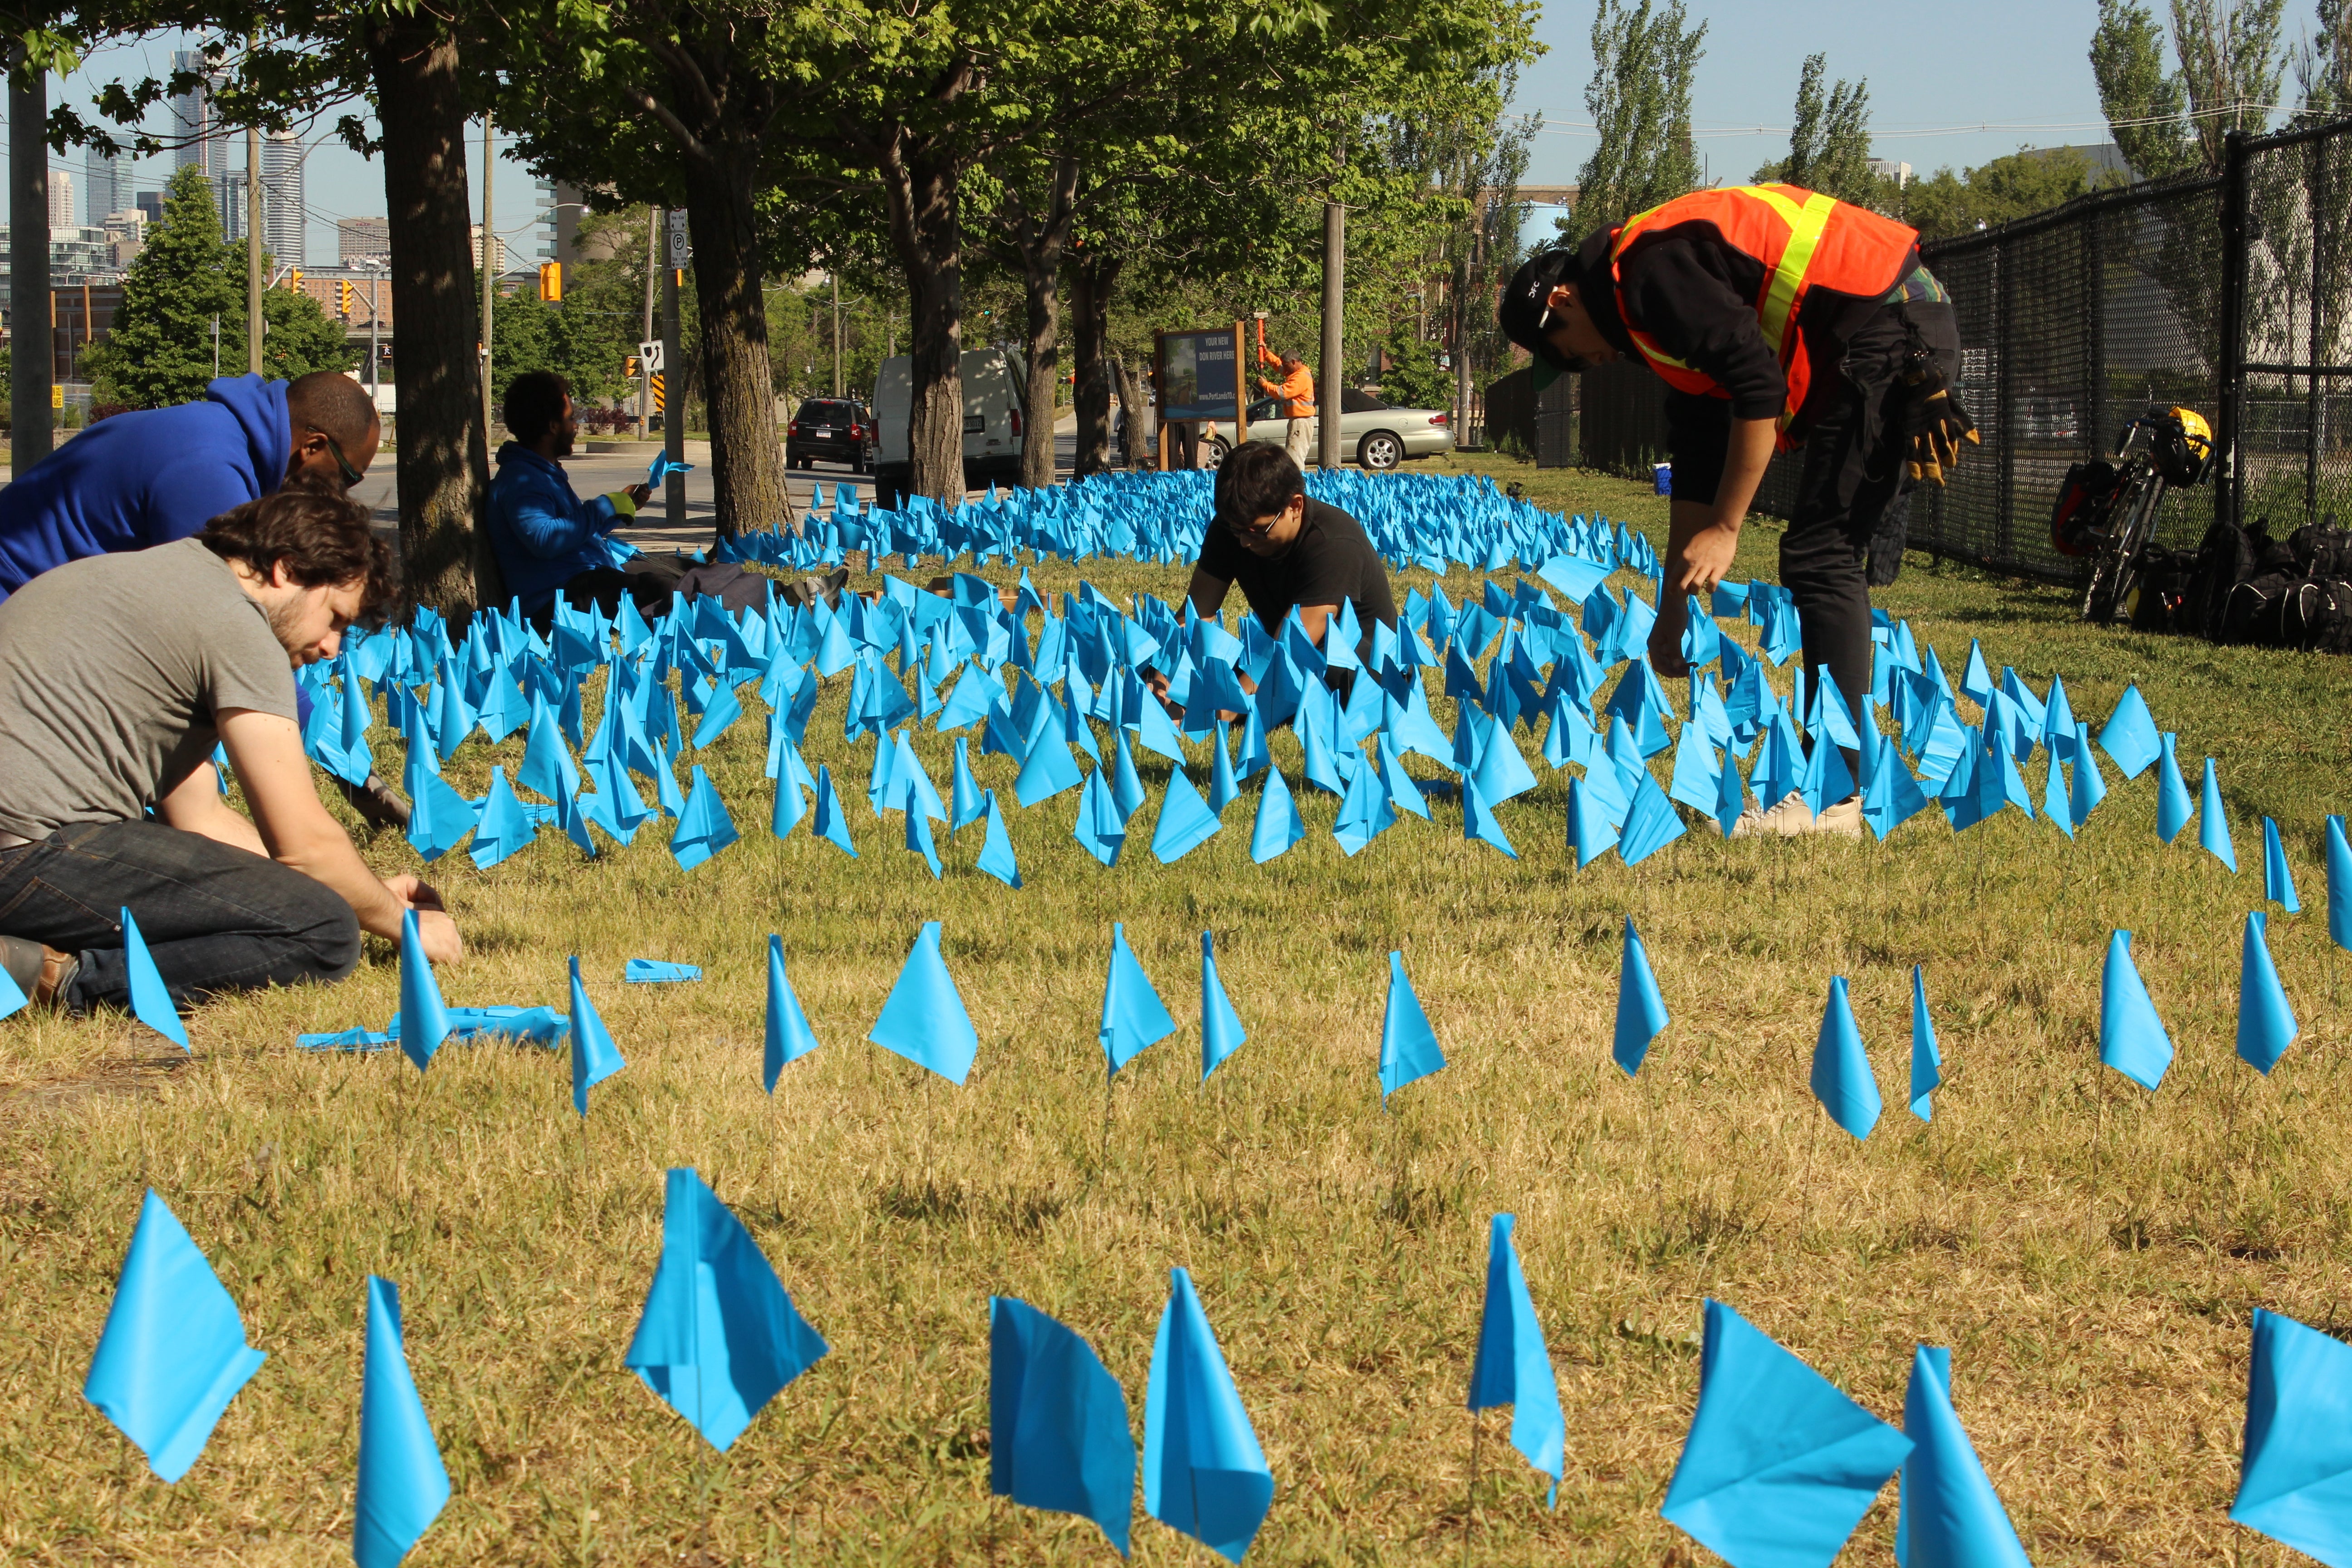 The team hard at work installing thousands of flags on Cherry Street in the Port Lands.